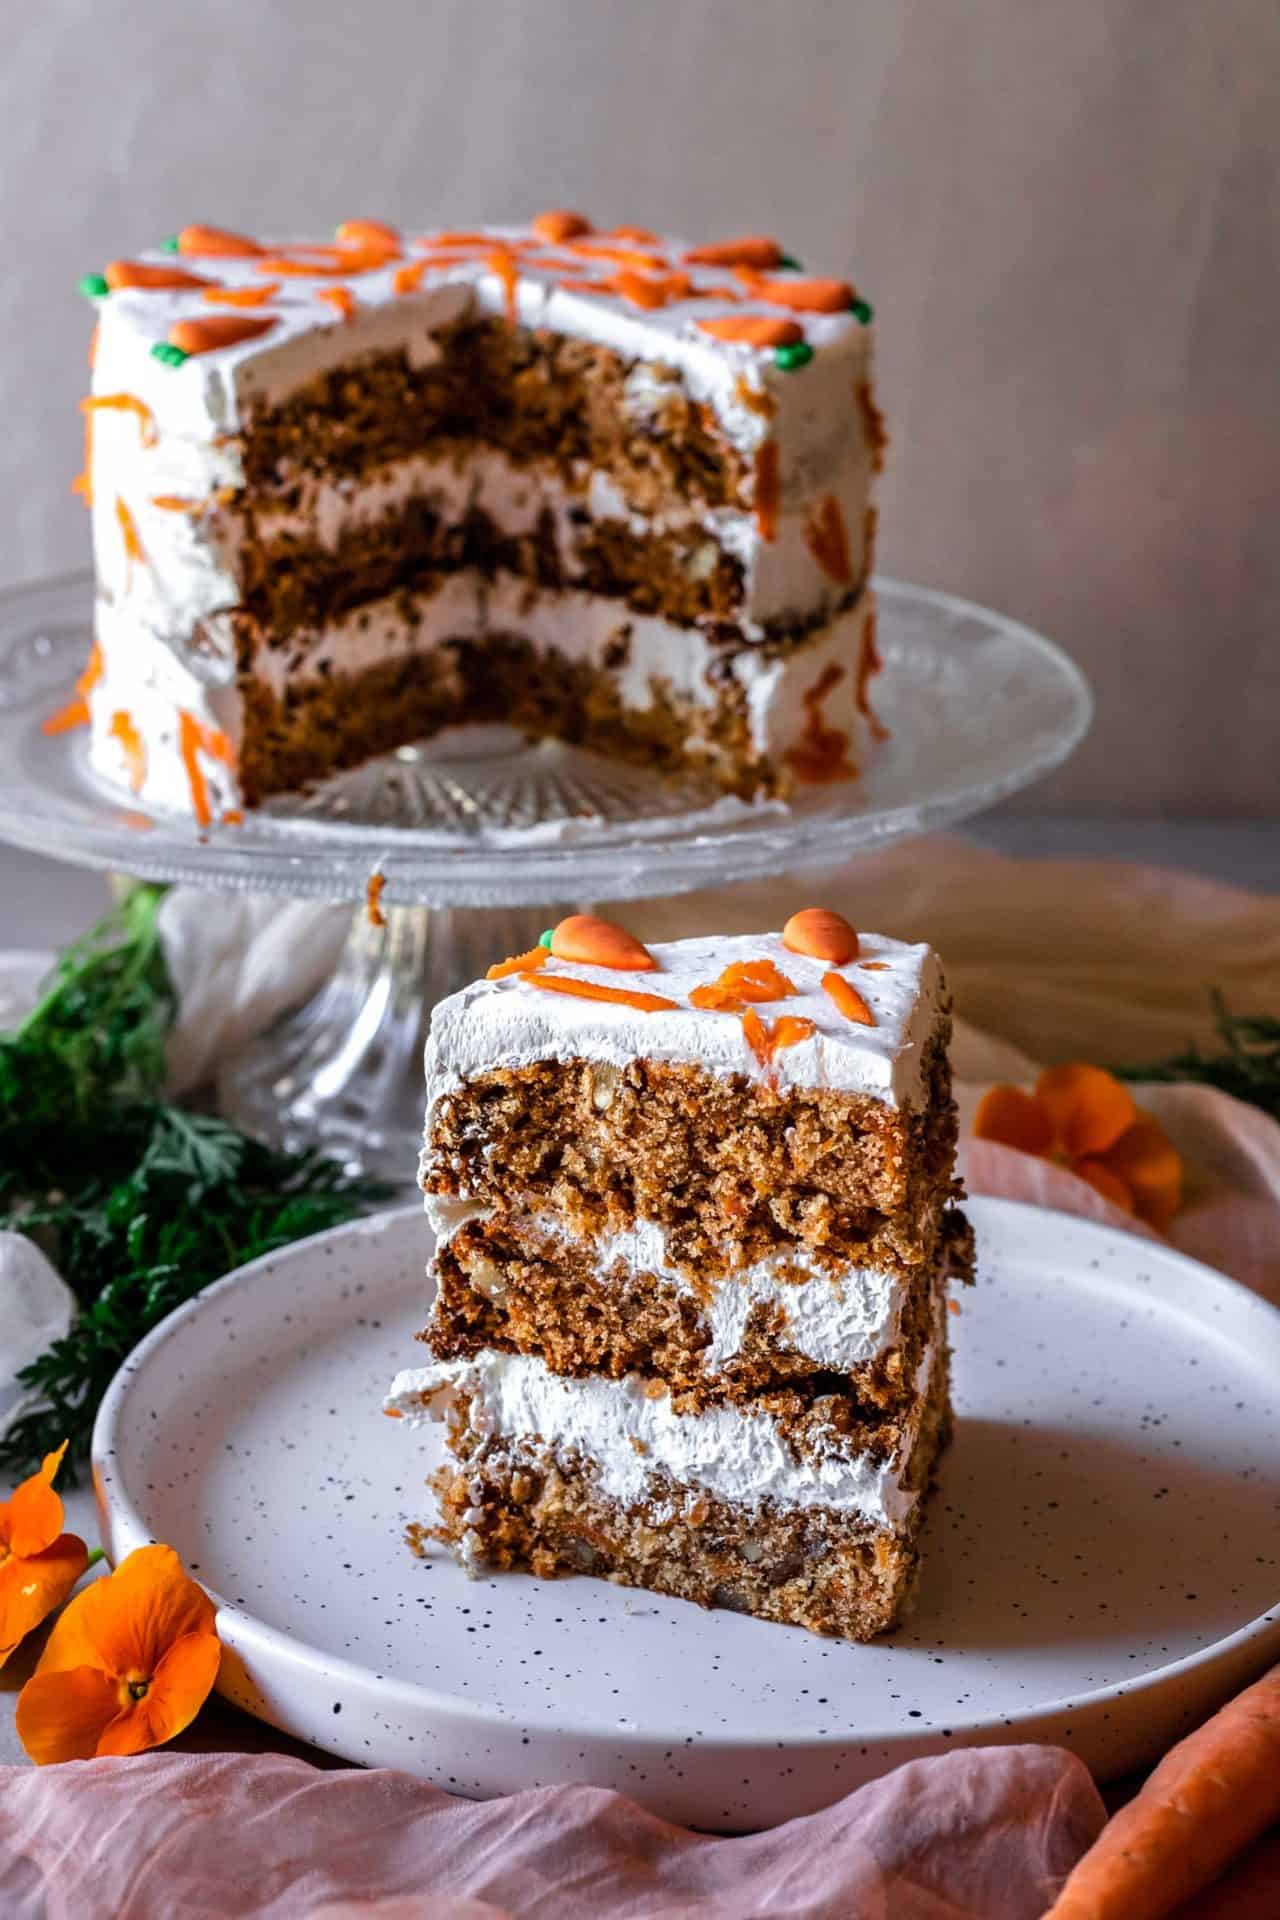 This Low FODMAP Carrot Cake is perfectly sweetened, flavorful, super tender and fluffy, moist, carrot packed and so delicious!